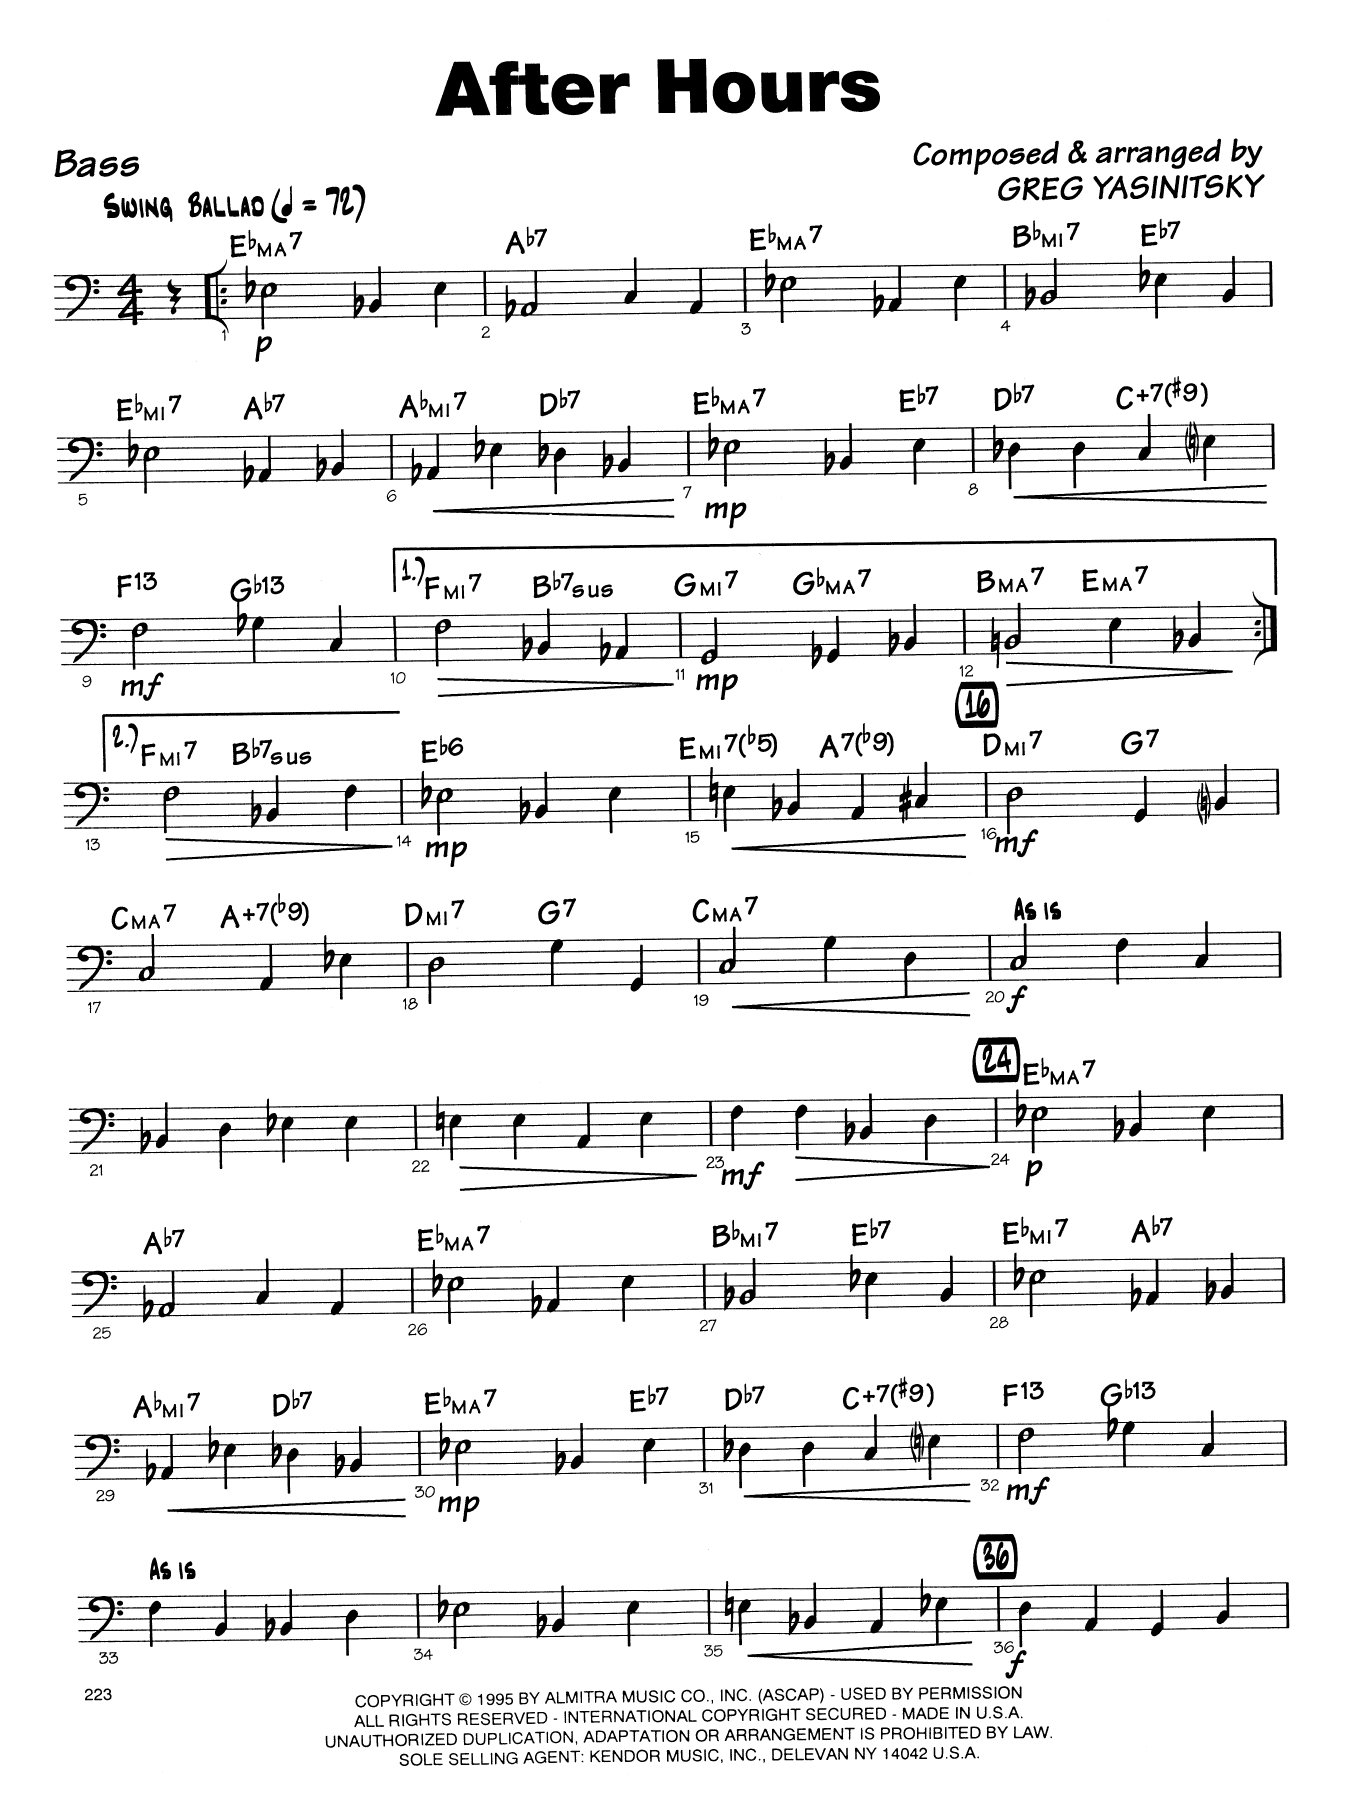 Download Gregory Yasinitsky After Hours - Bass Sheet Music